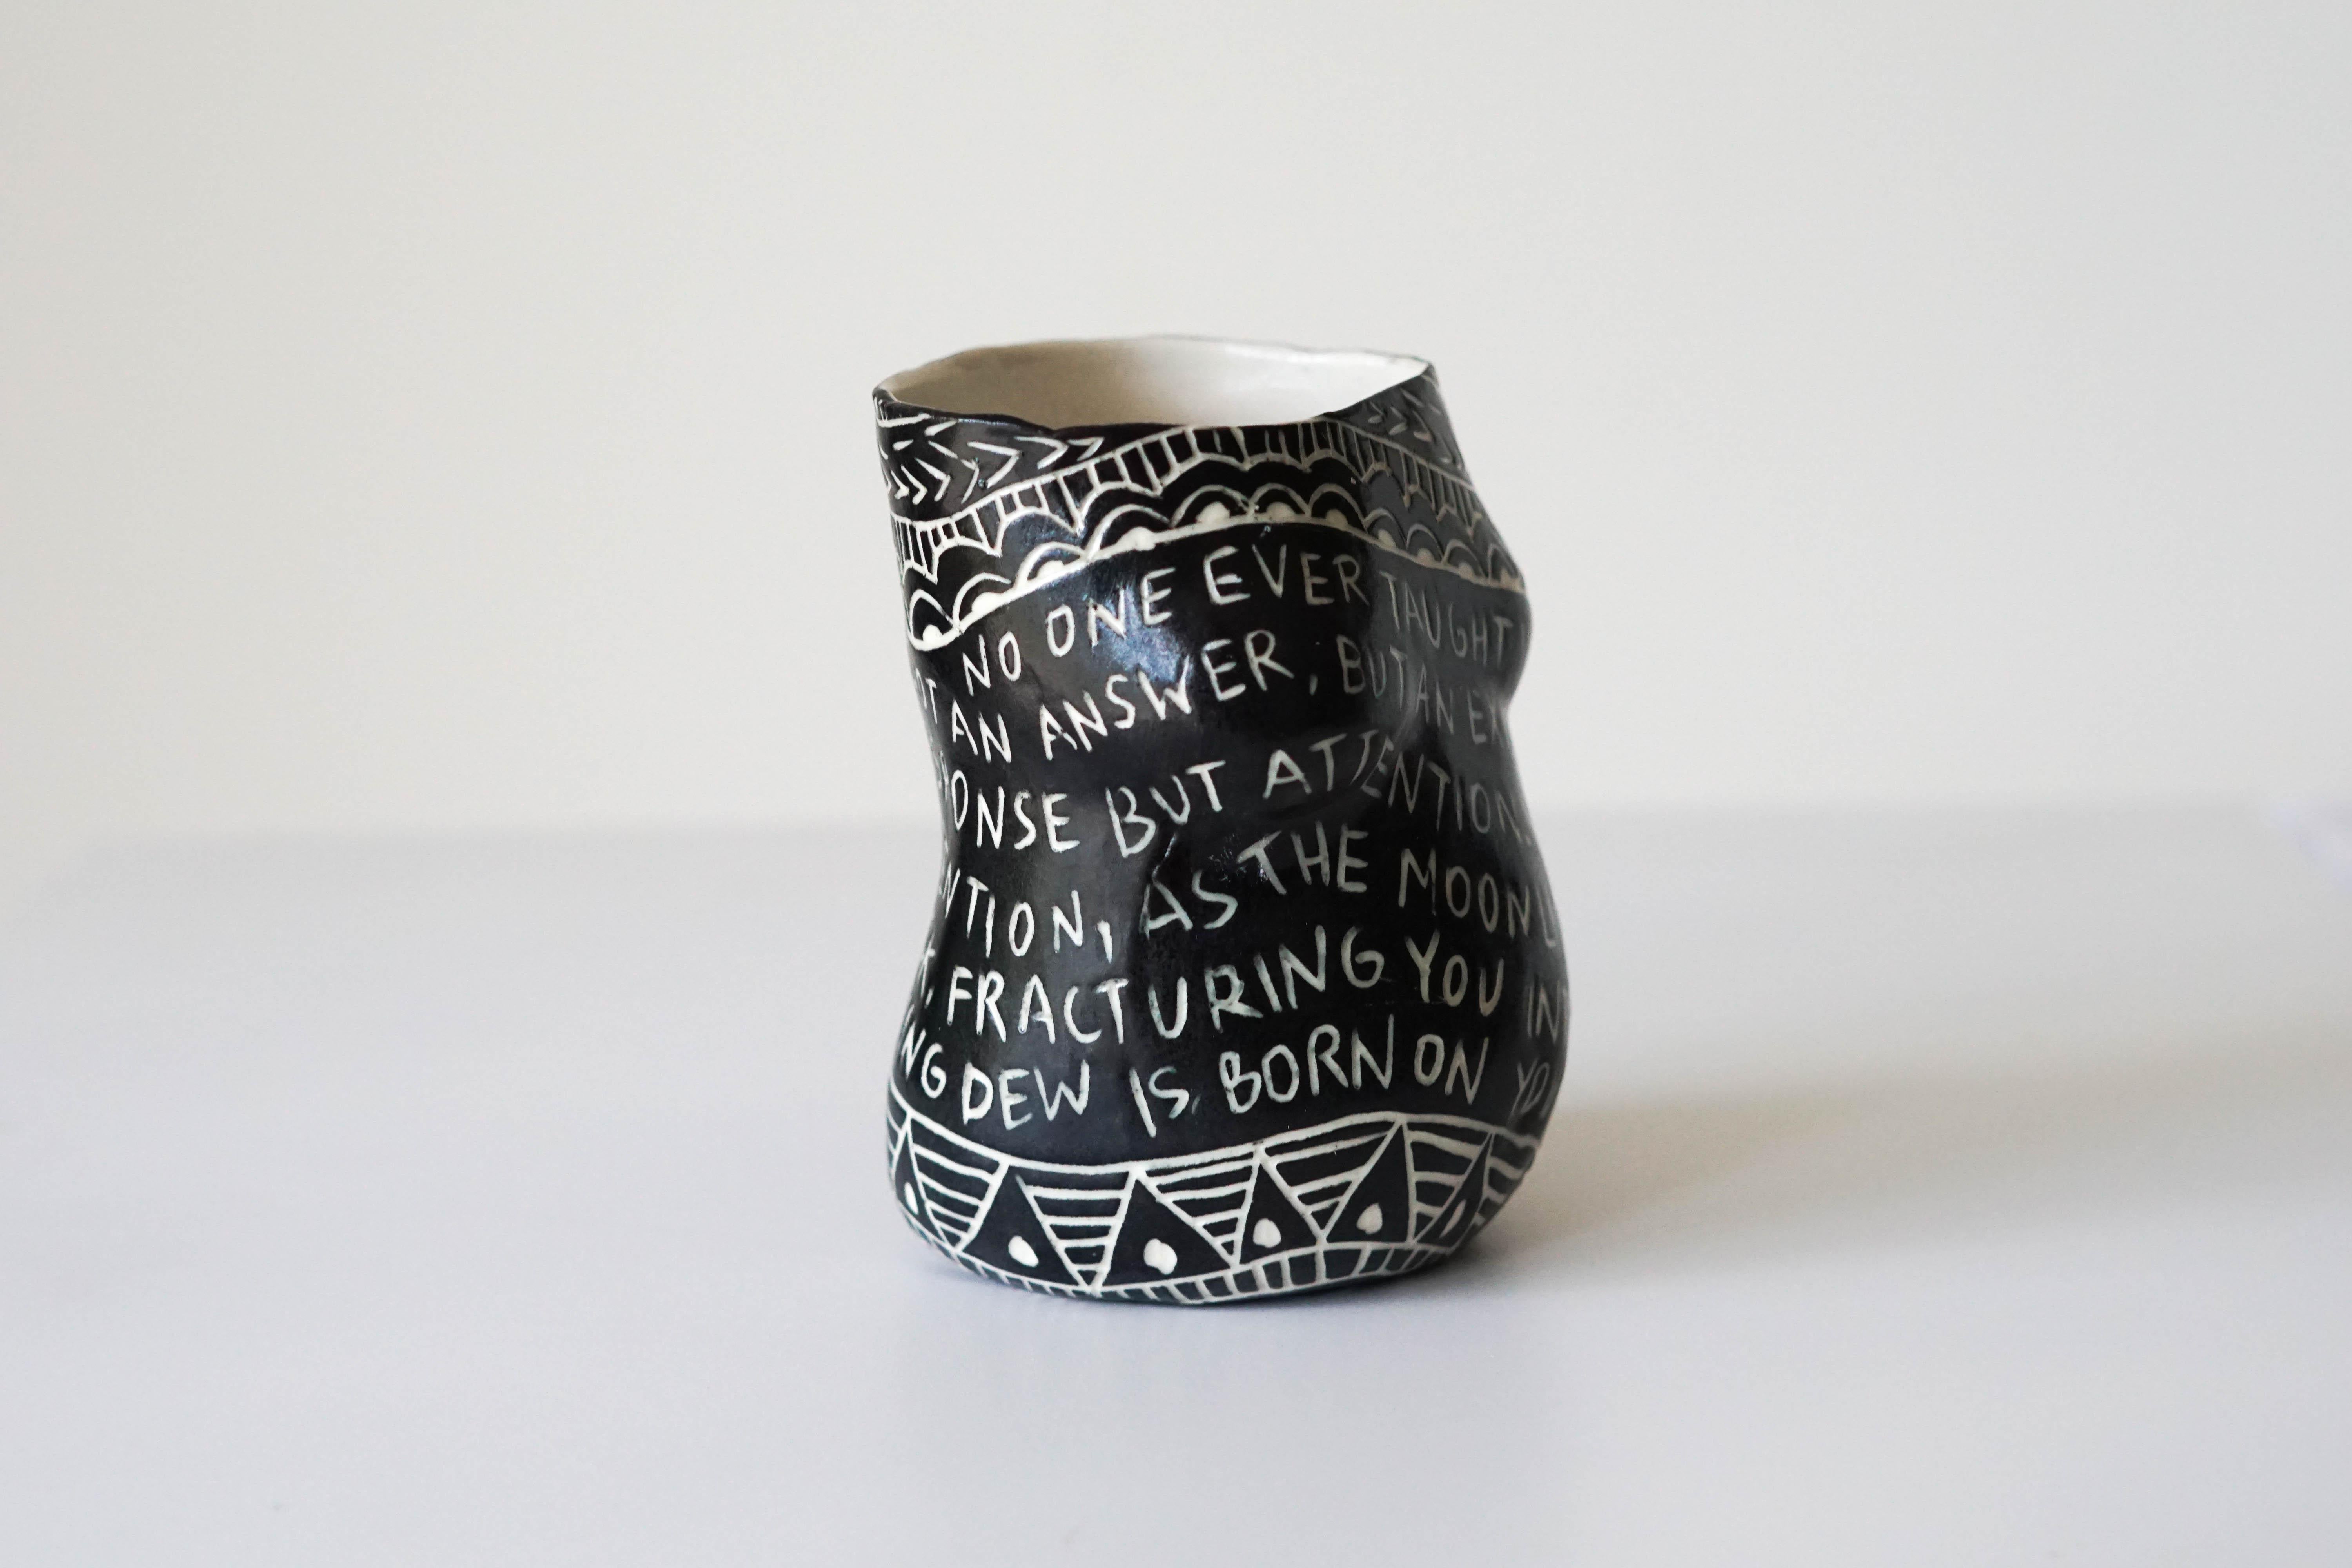 Contemporary “No one ever taught you...” Porcelain Cup with Sgraffito Detailing